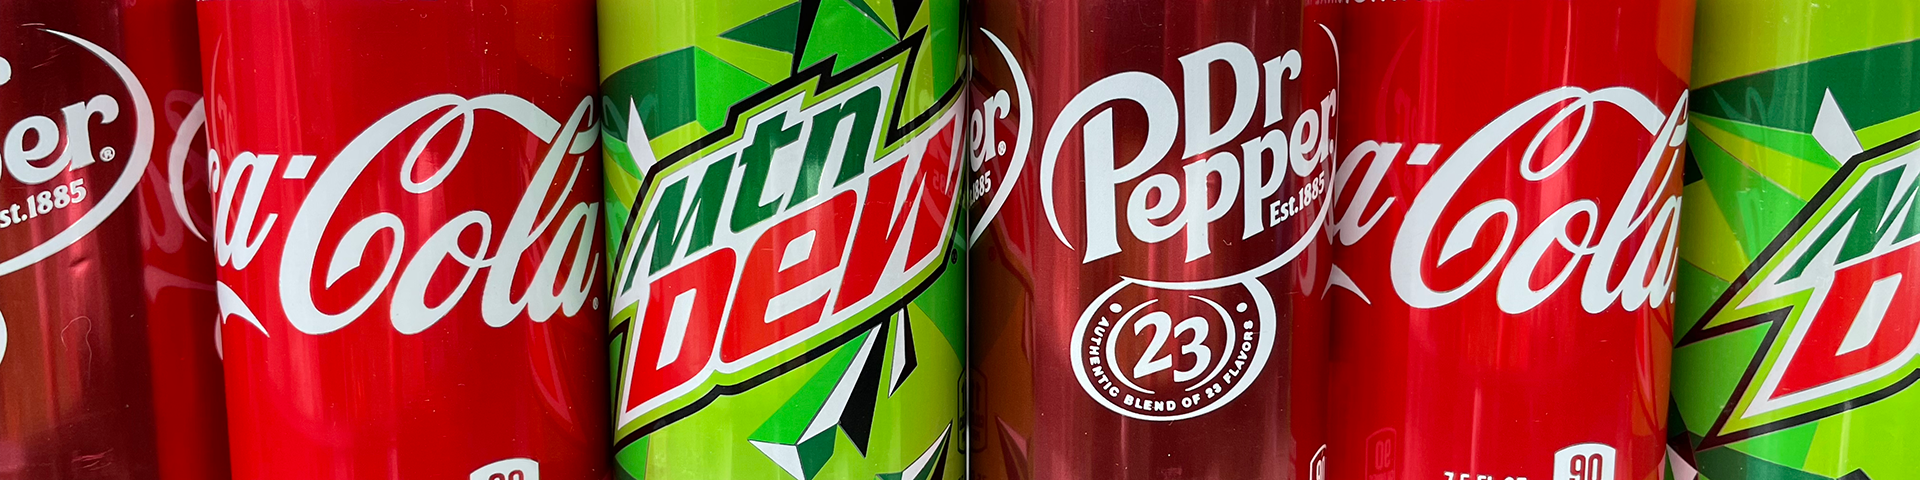 A line of soda cans (Dr. Pepper, Coca-Cola, Mountain Dew)